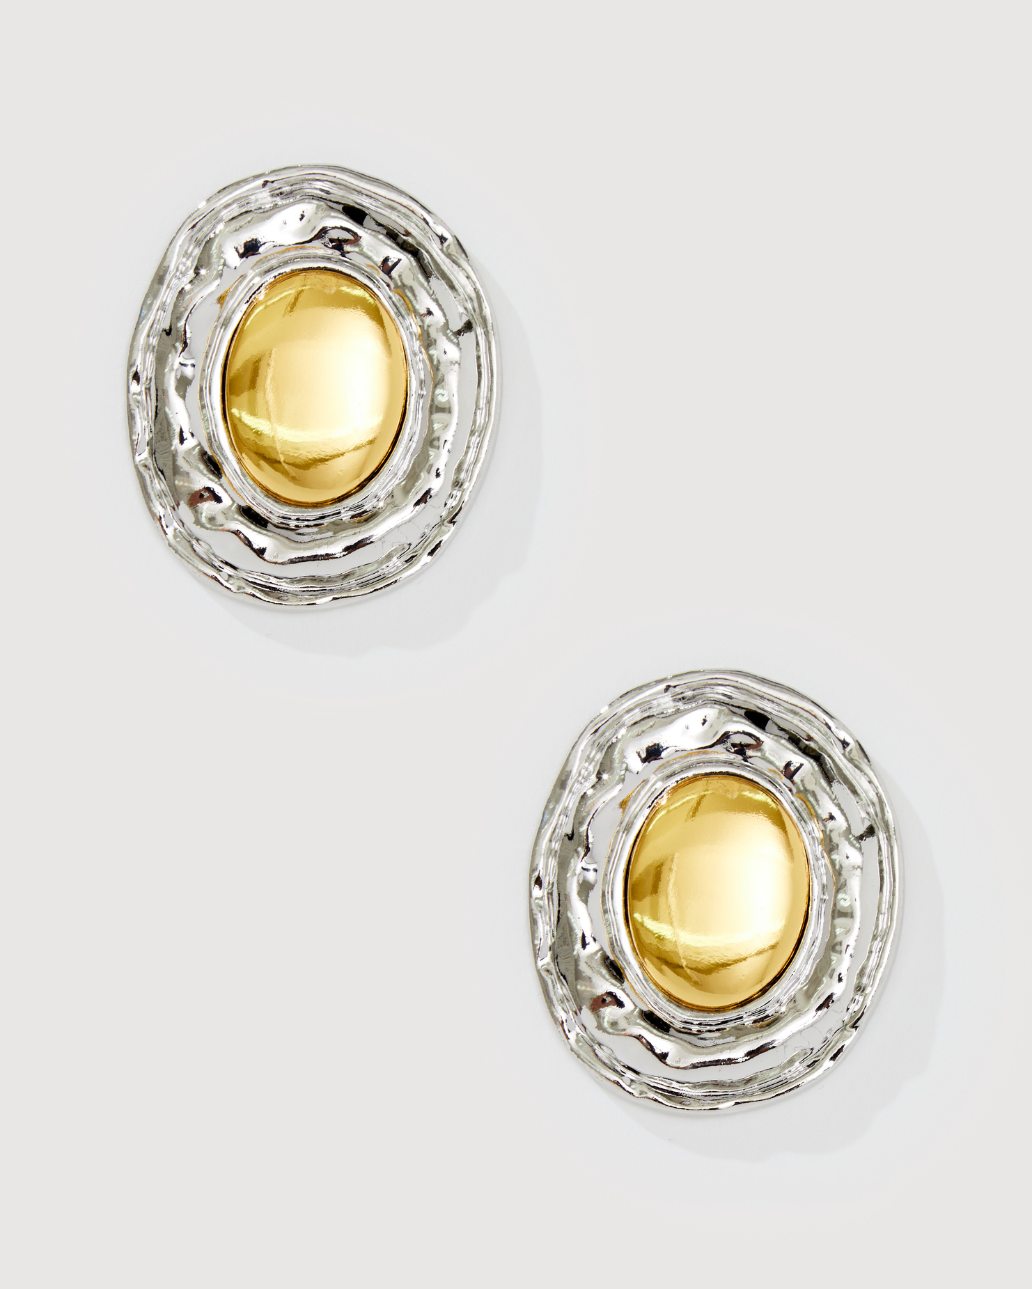 TWO-TONED STATEMENT EARRING